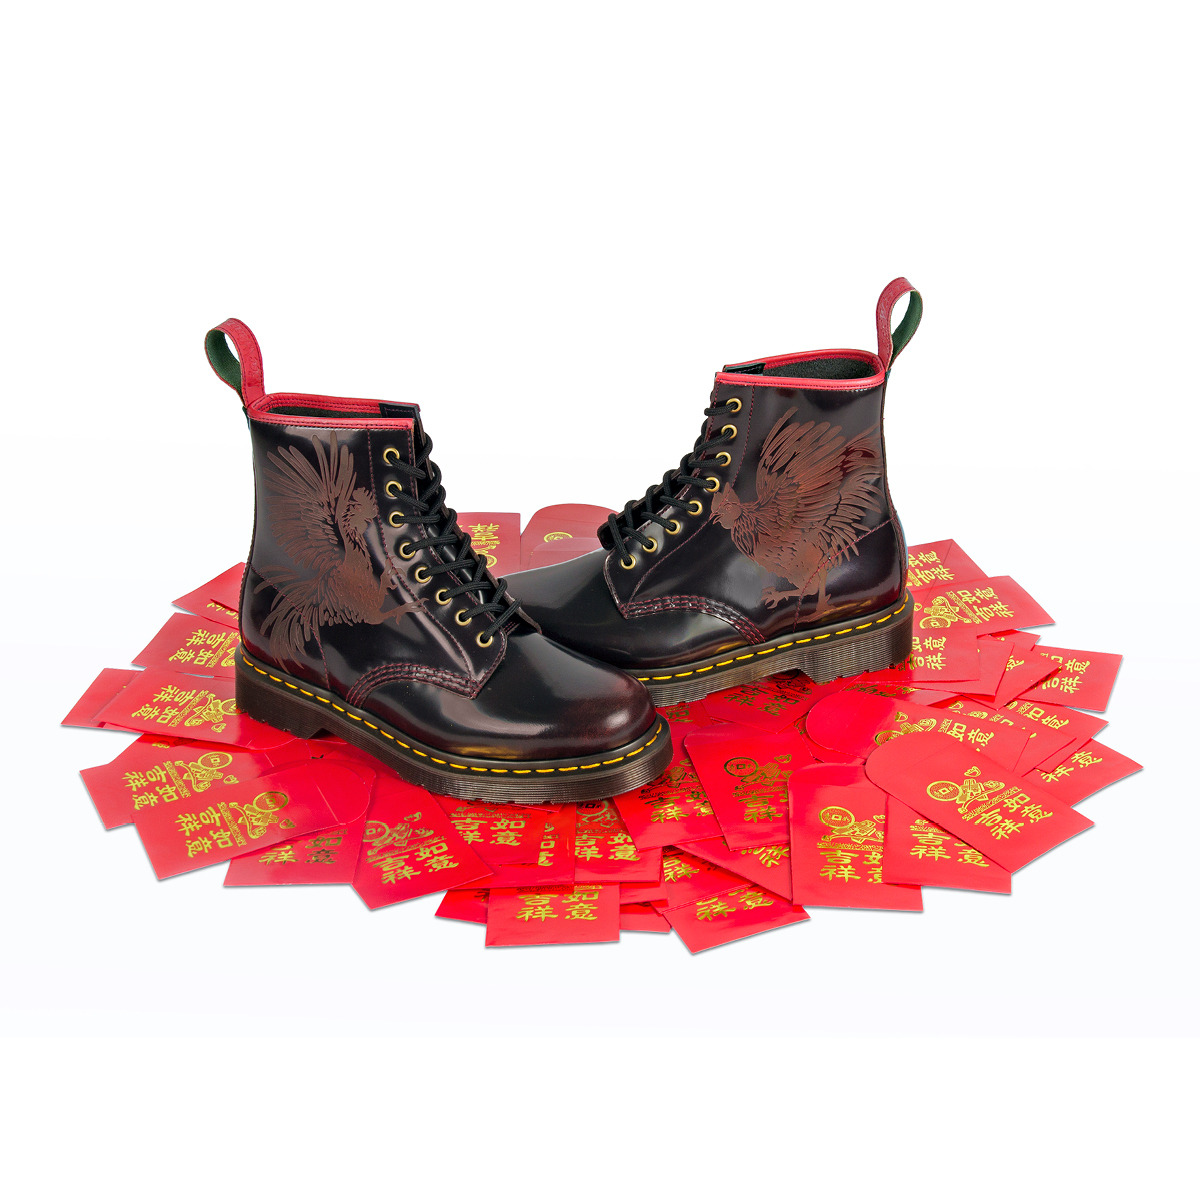 Agrarisch sessie Intrekking DR. MARTENS — YEAR OF THE FIRE ROOSTER: Let your feet celebrate...